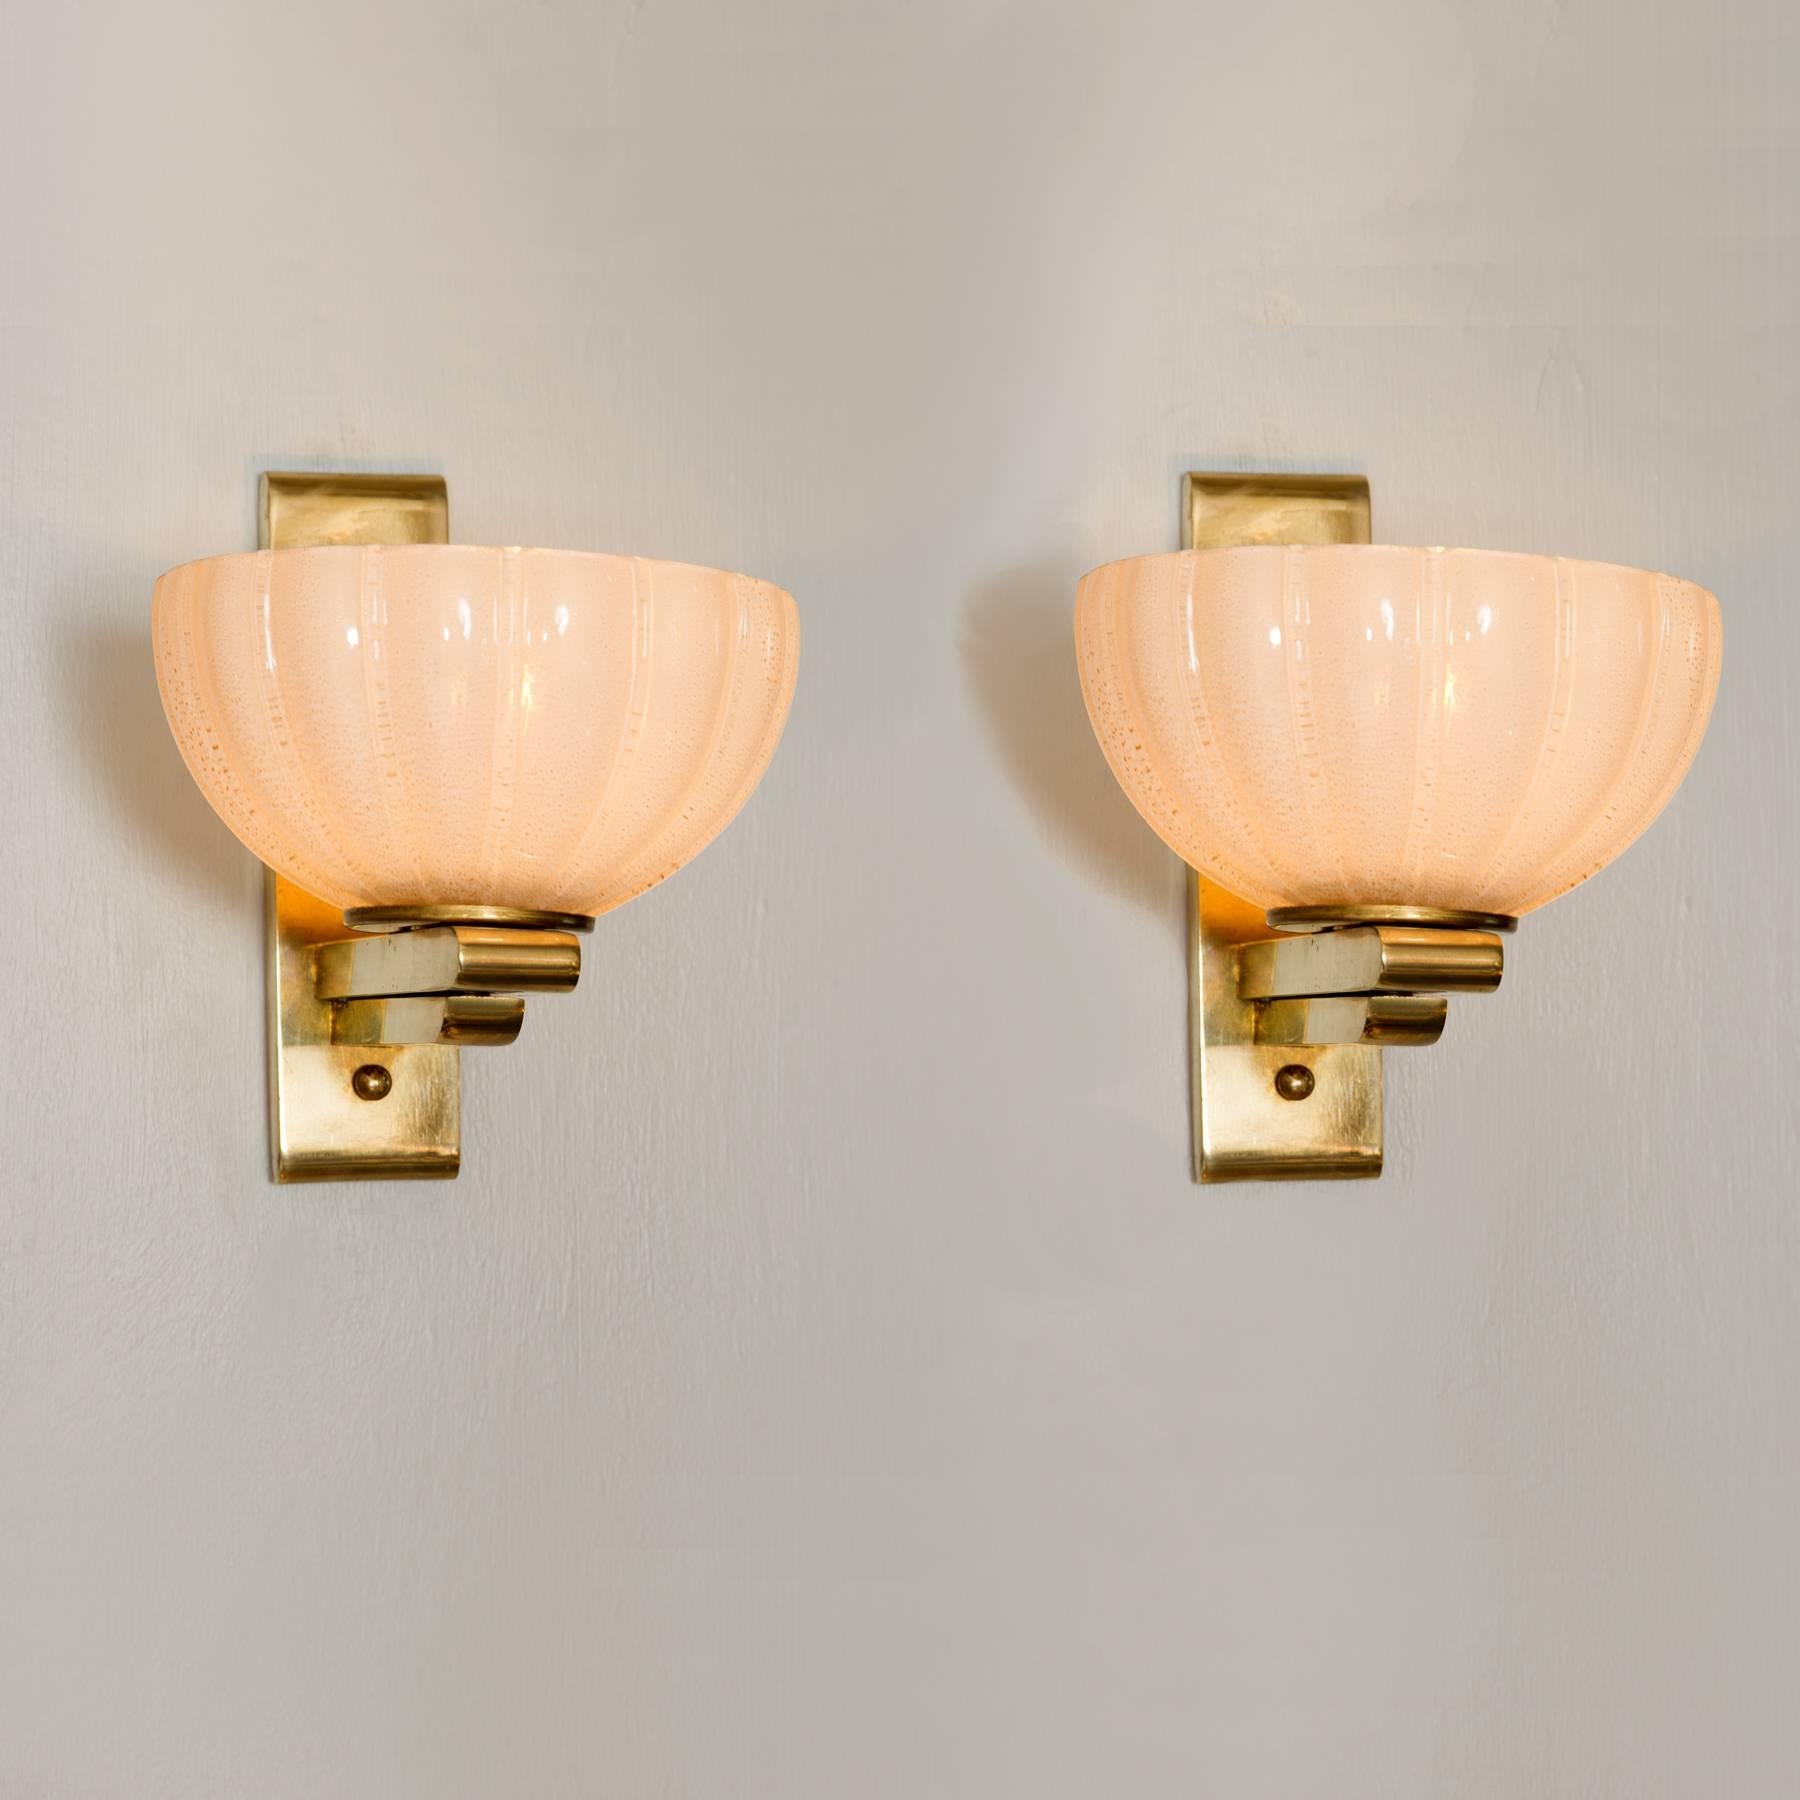 Chic wall lights each with a brass bracket holding a delicate ribbed cup of aerated white glass, can be sold individually.